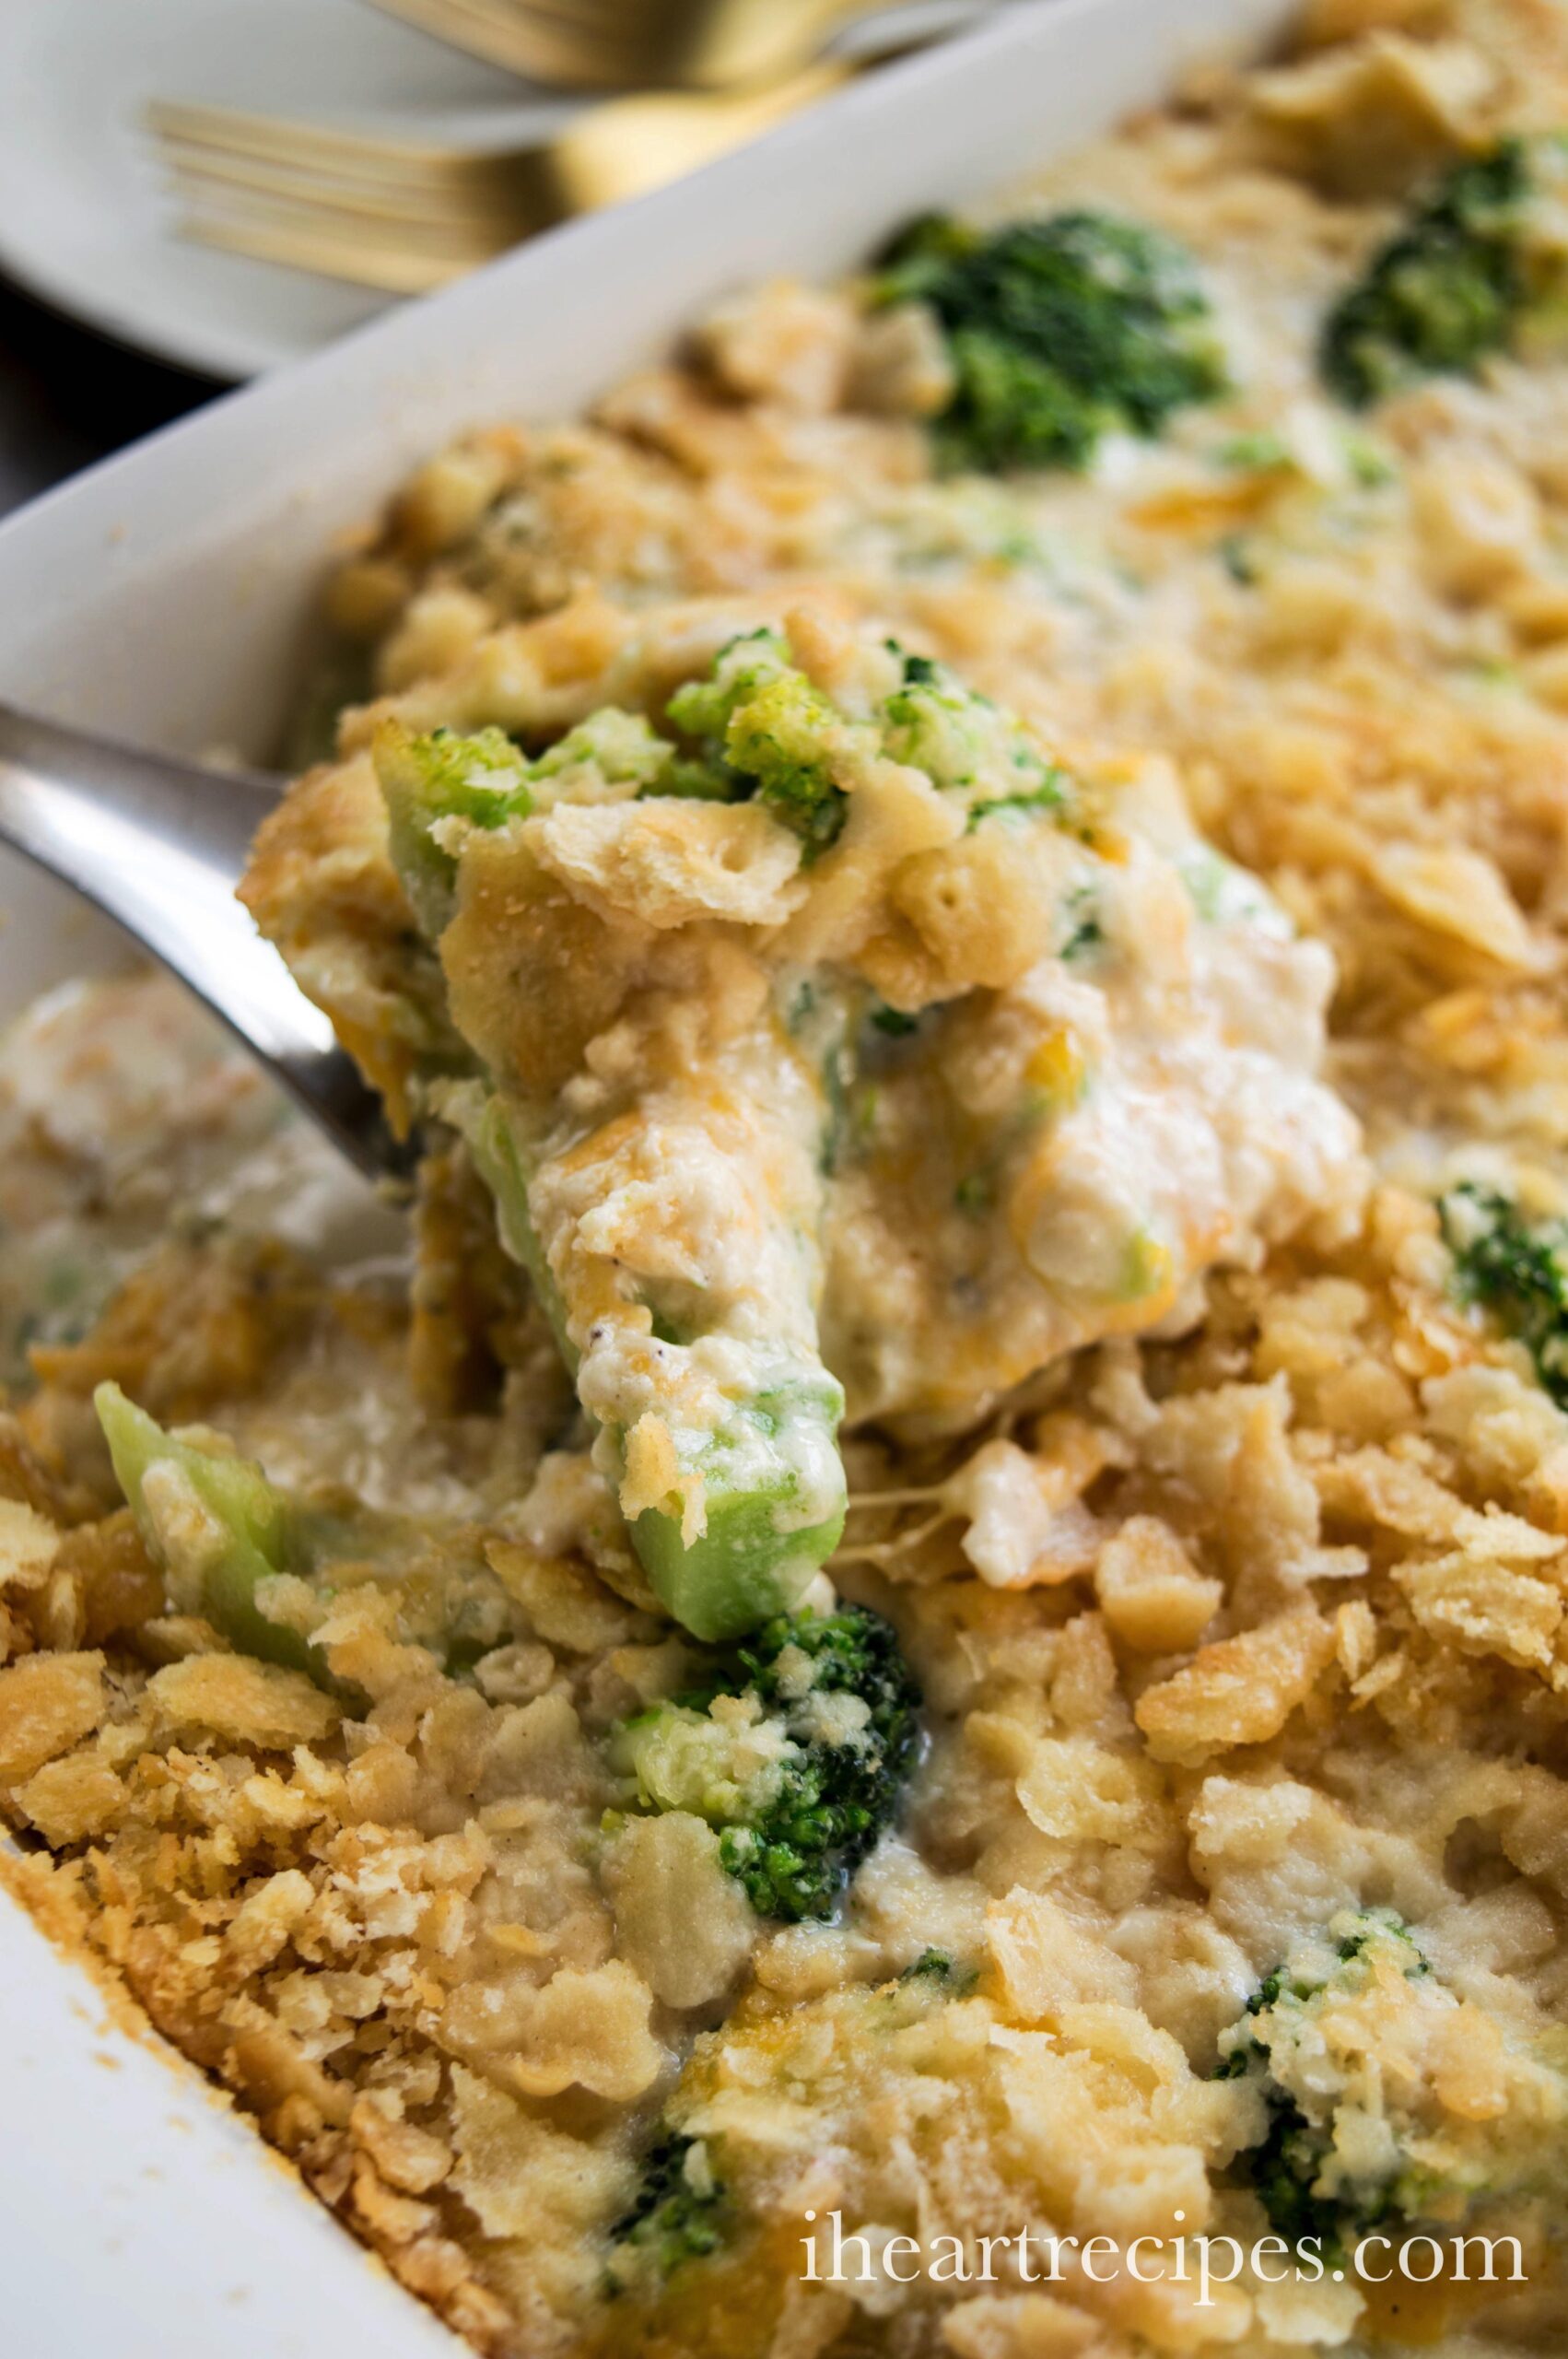  Creamy, cheesy, and packed with nutrition.